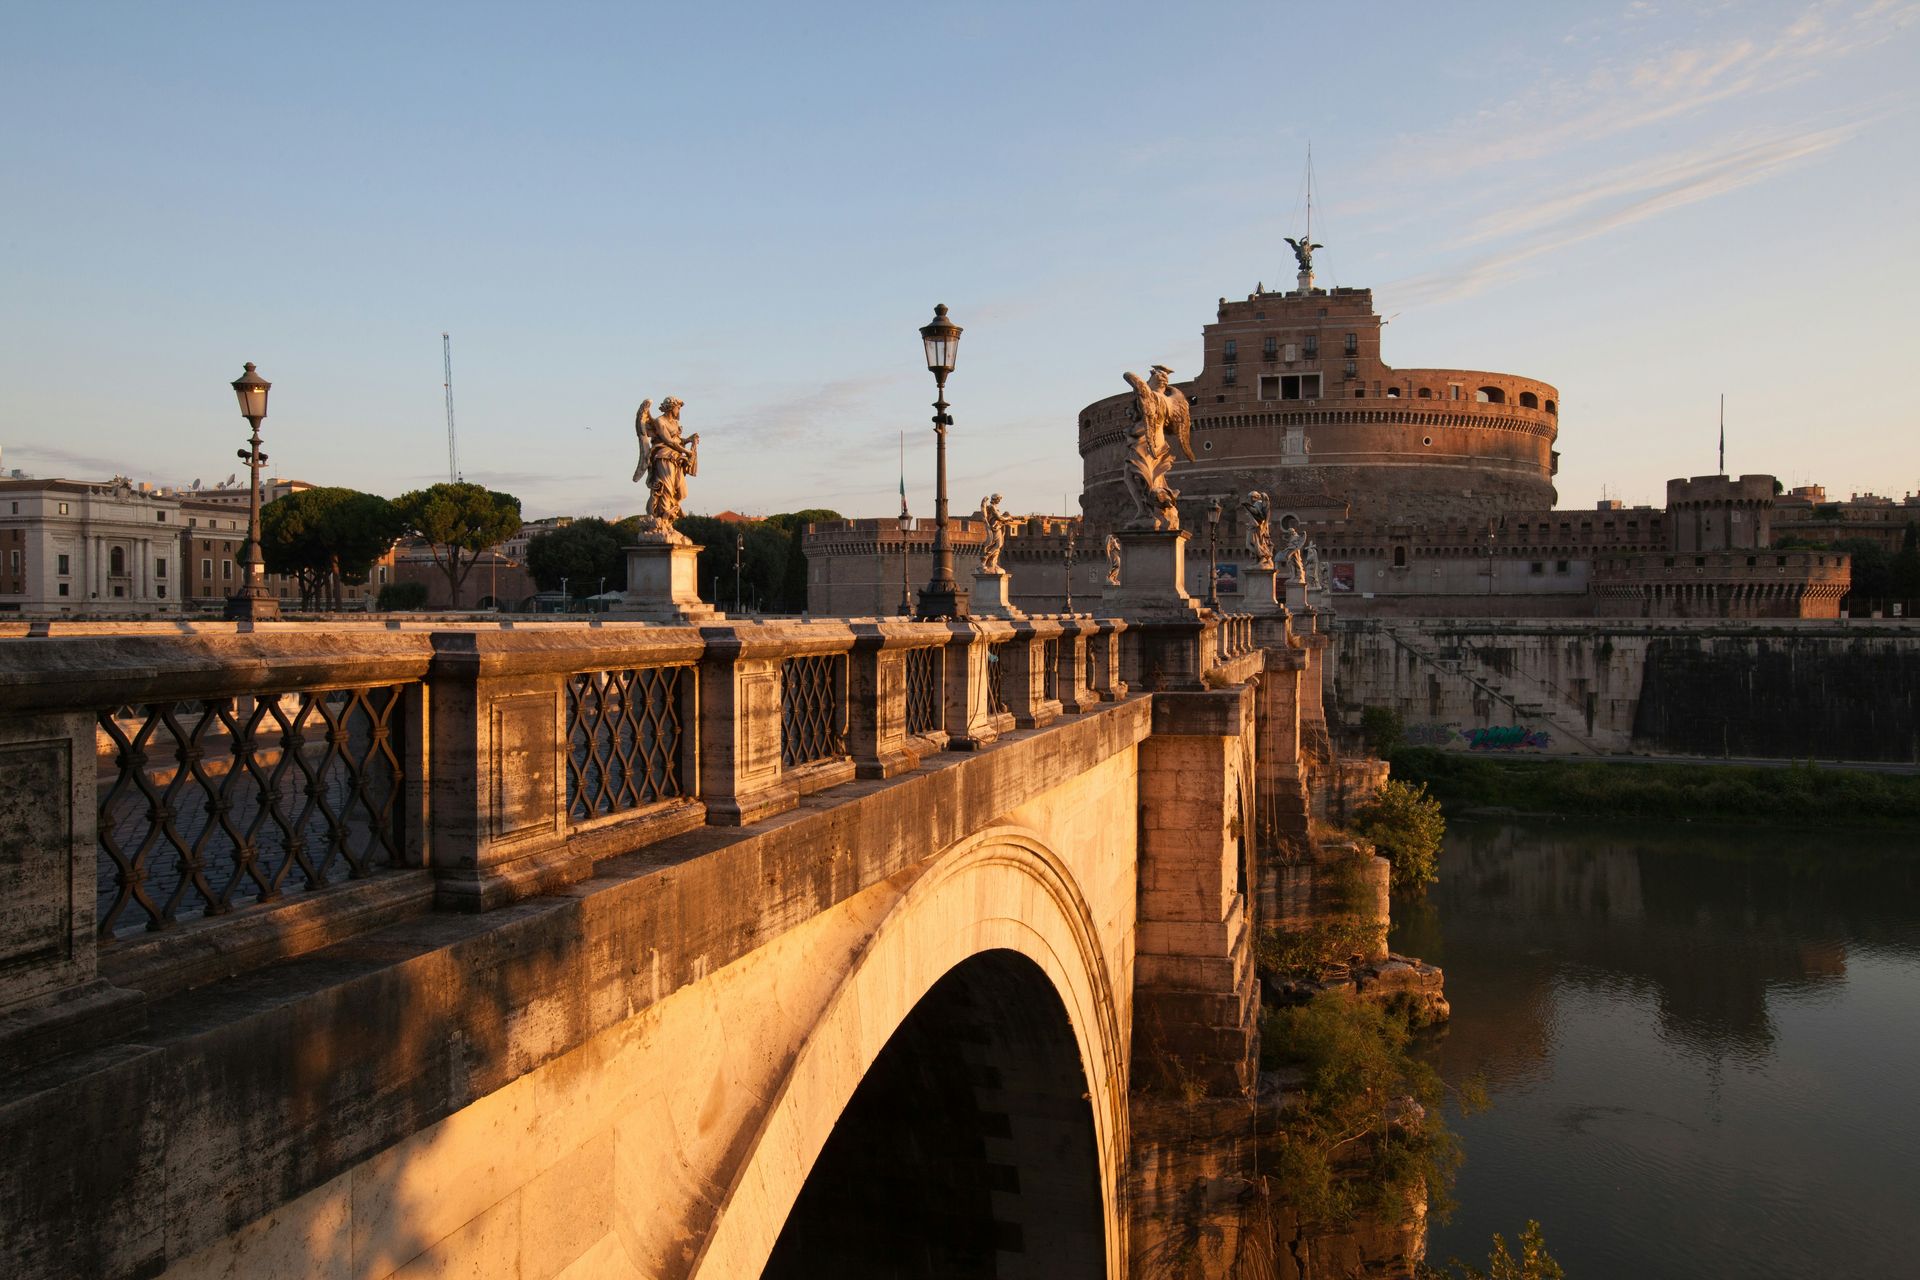 What is Castel Sant’Angelo Rome?